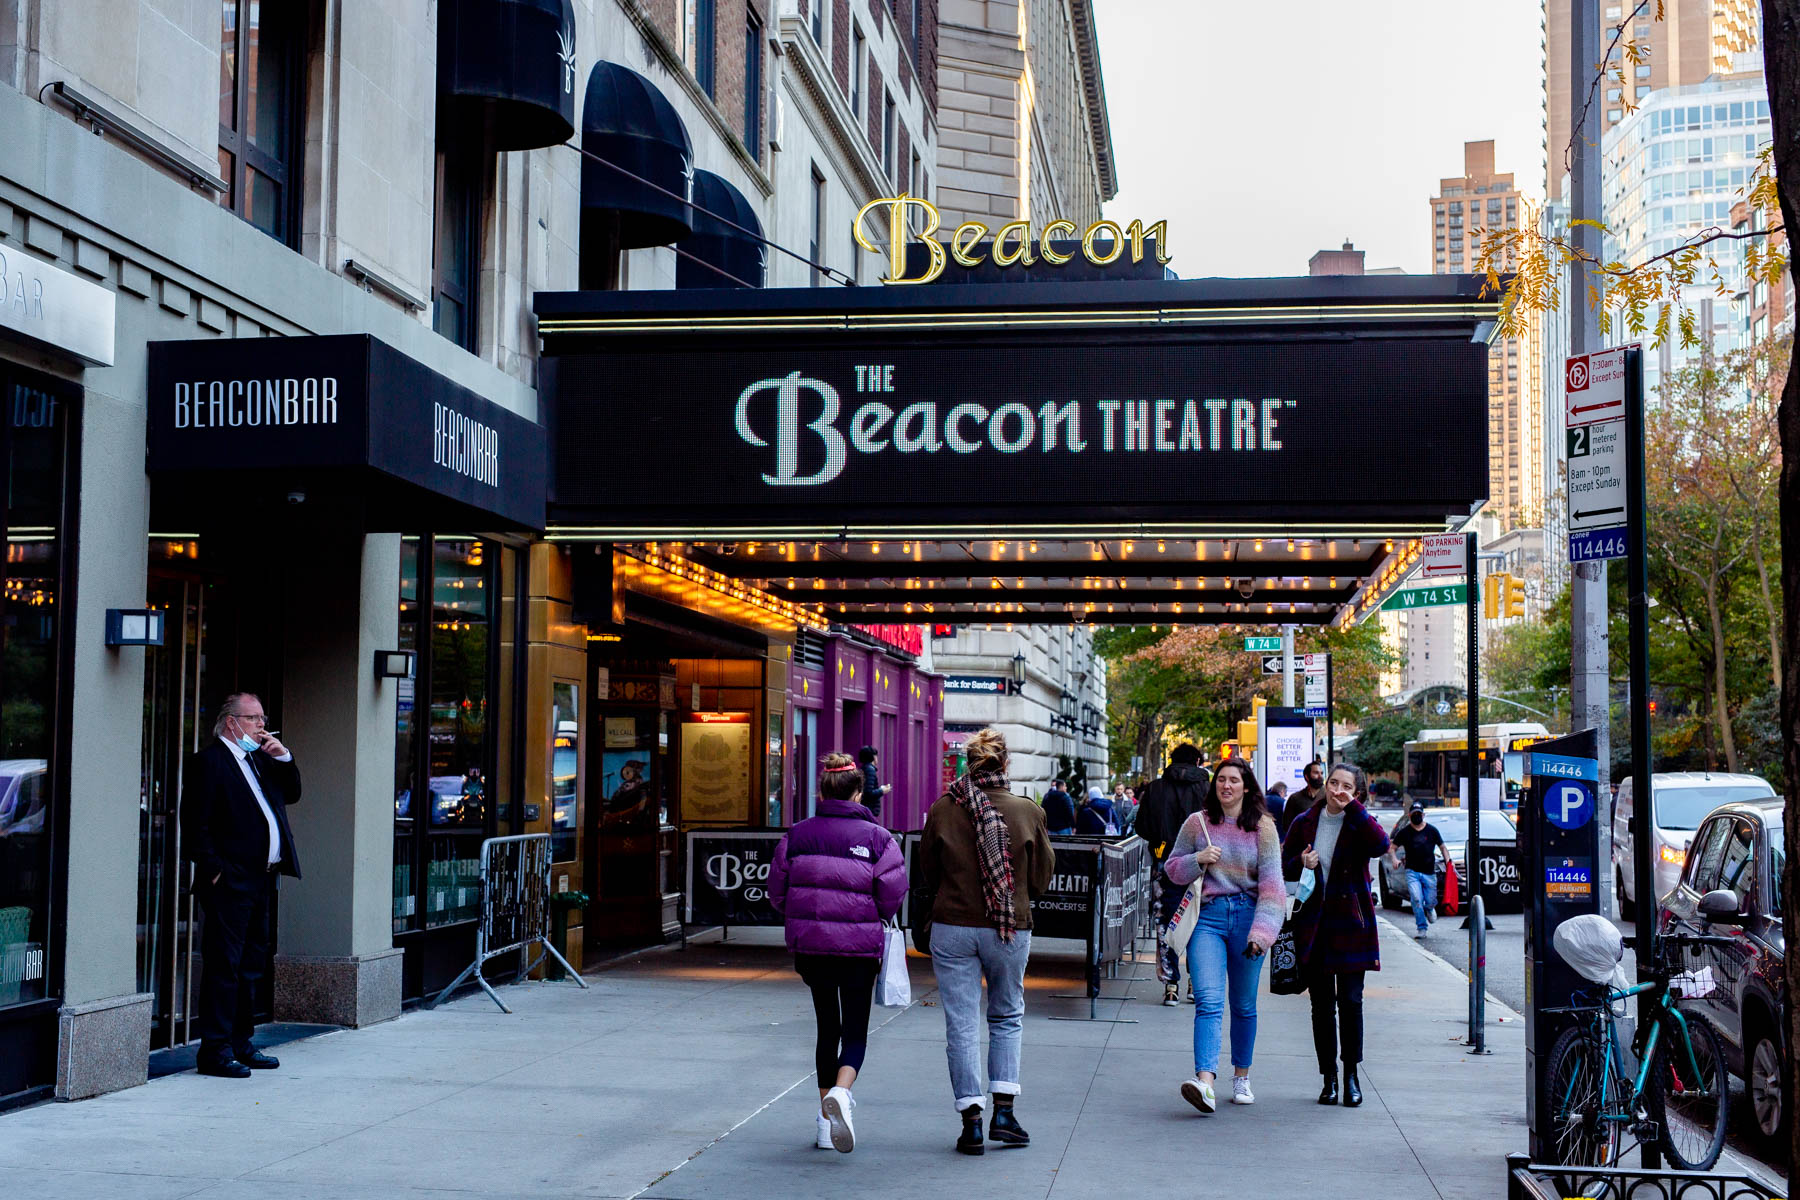 Beacon Theatre
Best things to do in New York City in February